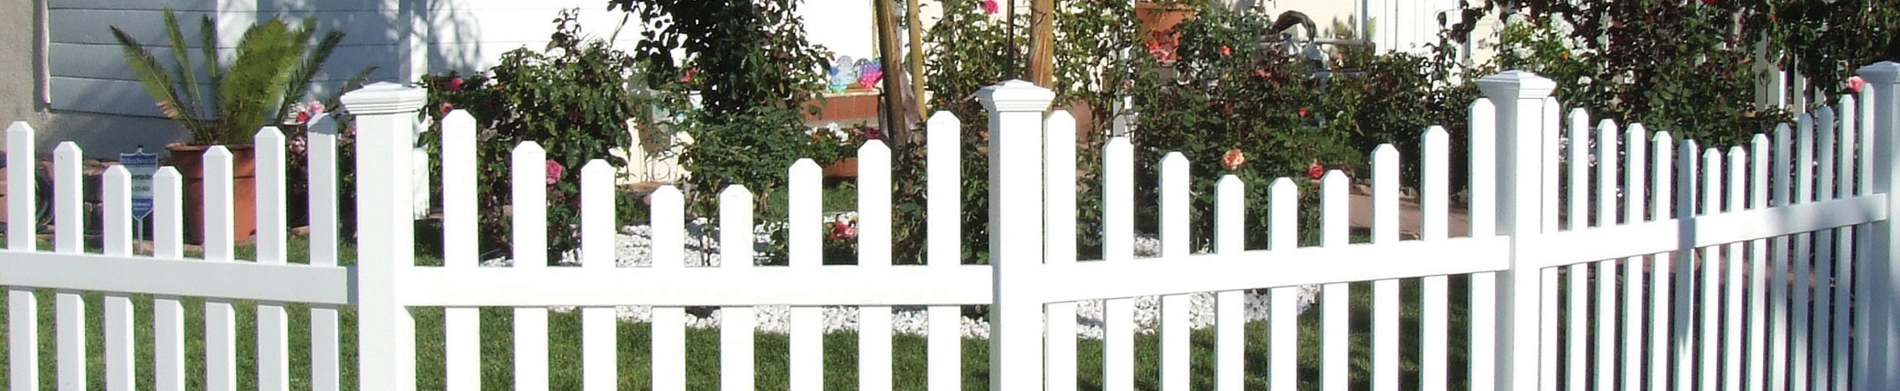 Looking for the best vinyl fence? Duramax offering vinyl fence for sale